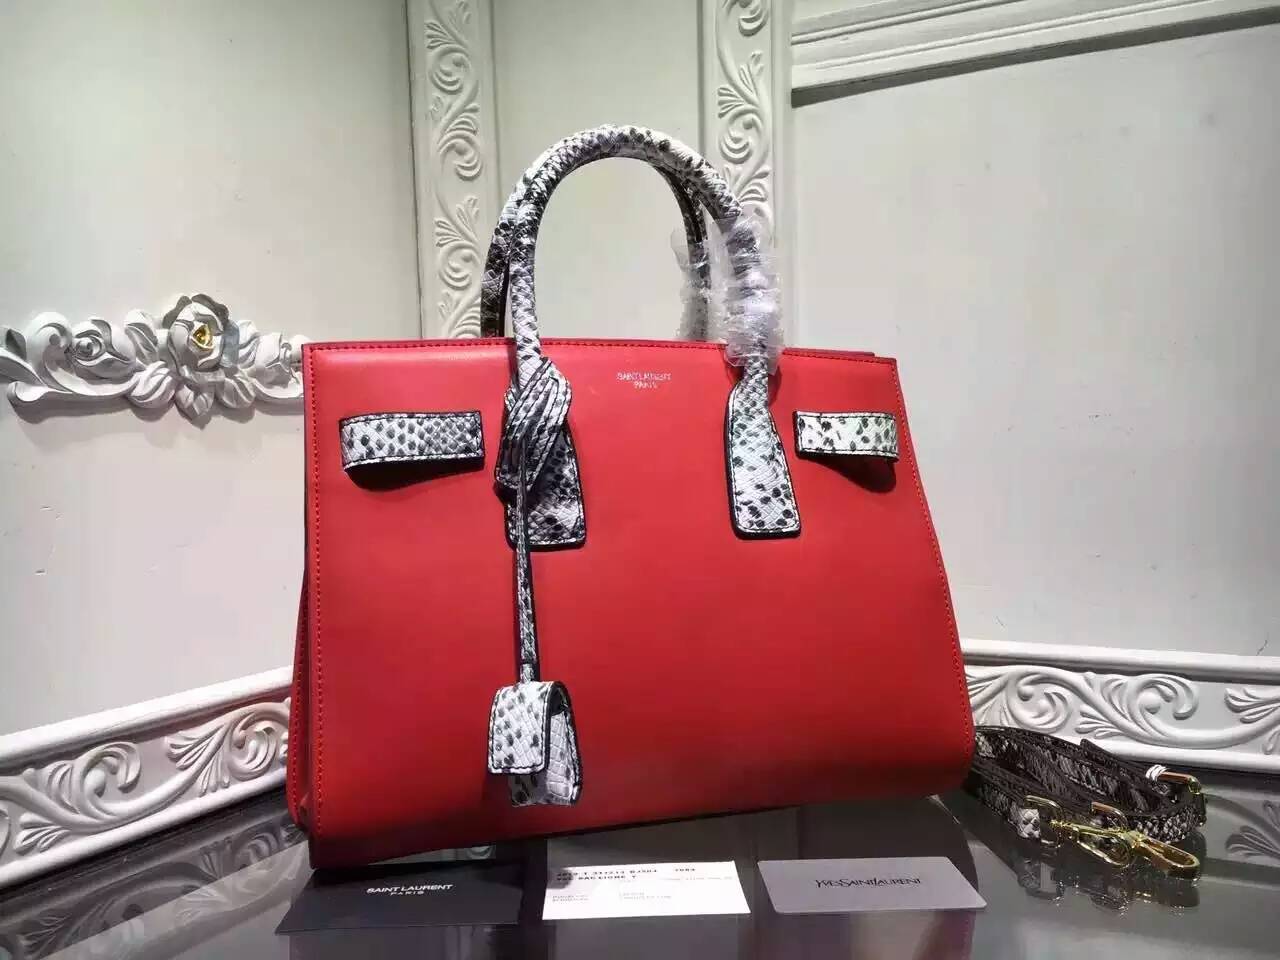 2016 New Saint Laurent Bag Cheap Sale-Saint Laurent Classic Sac De Jour Bag in Red Calfskin and Python Embossed Leather - Click Image to Close